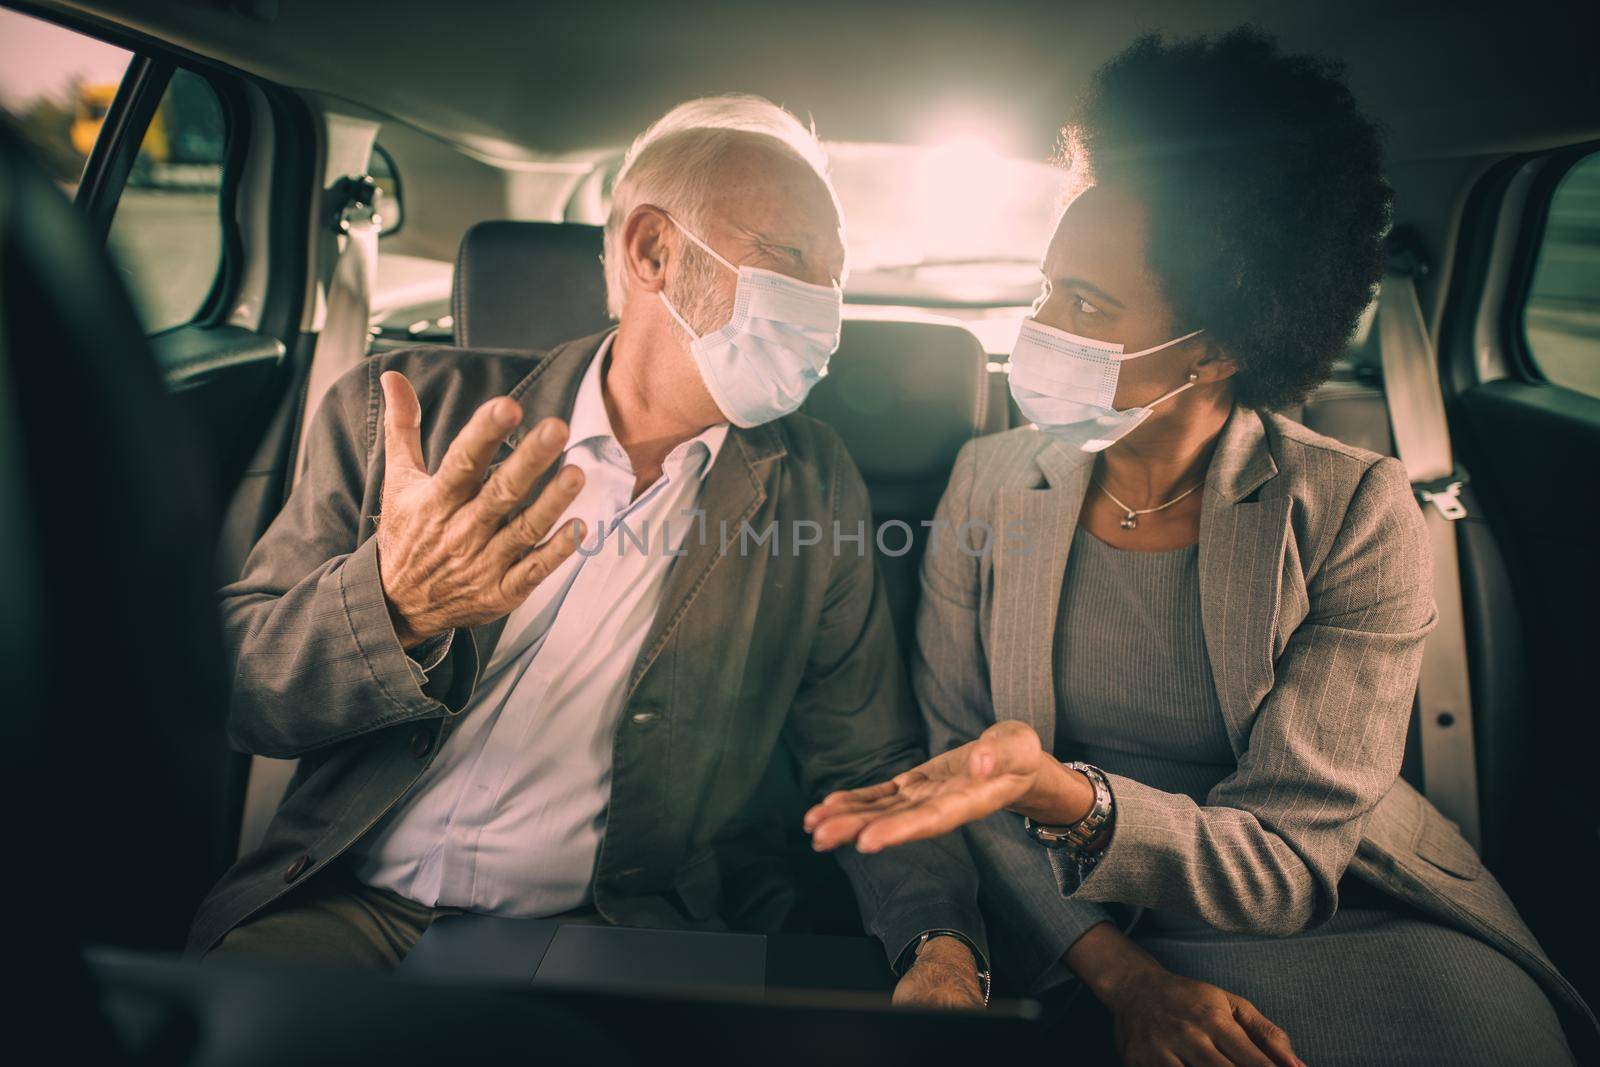 Shot of two successful multi-ethnic people with protective mask using laptop and having a discussion while sitting in the backseat of a car on their business commute during COVID-19 pandemic.